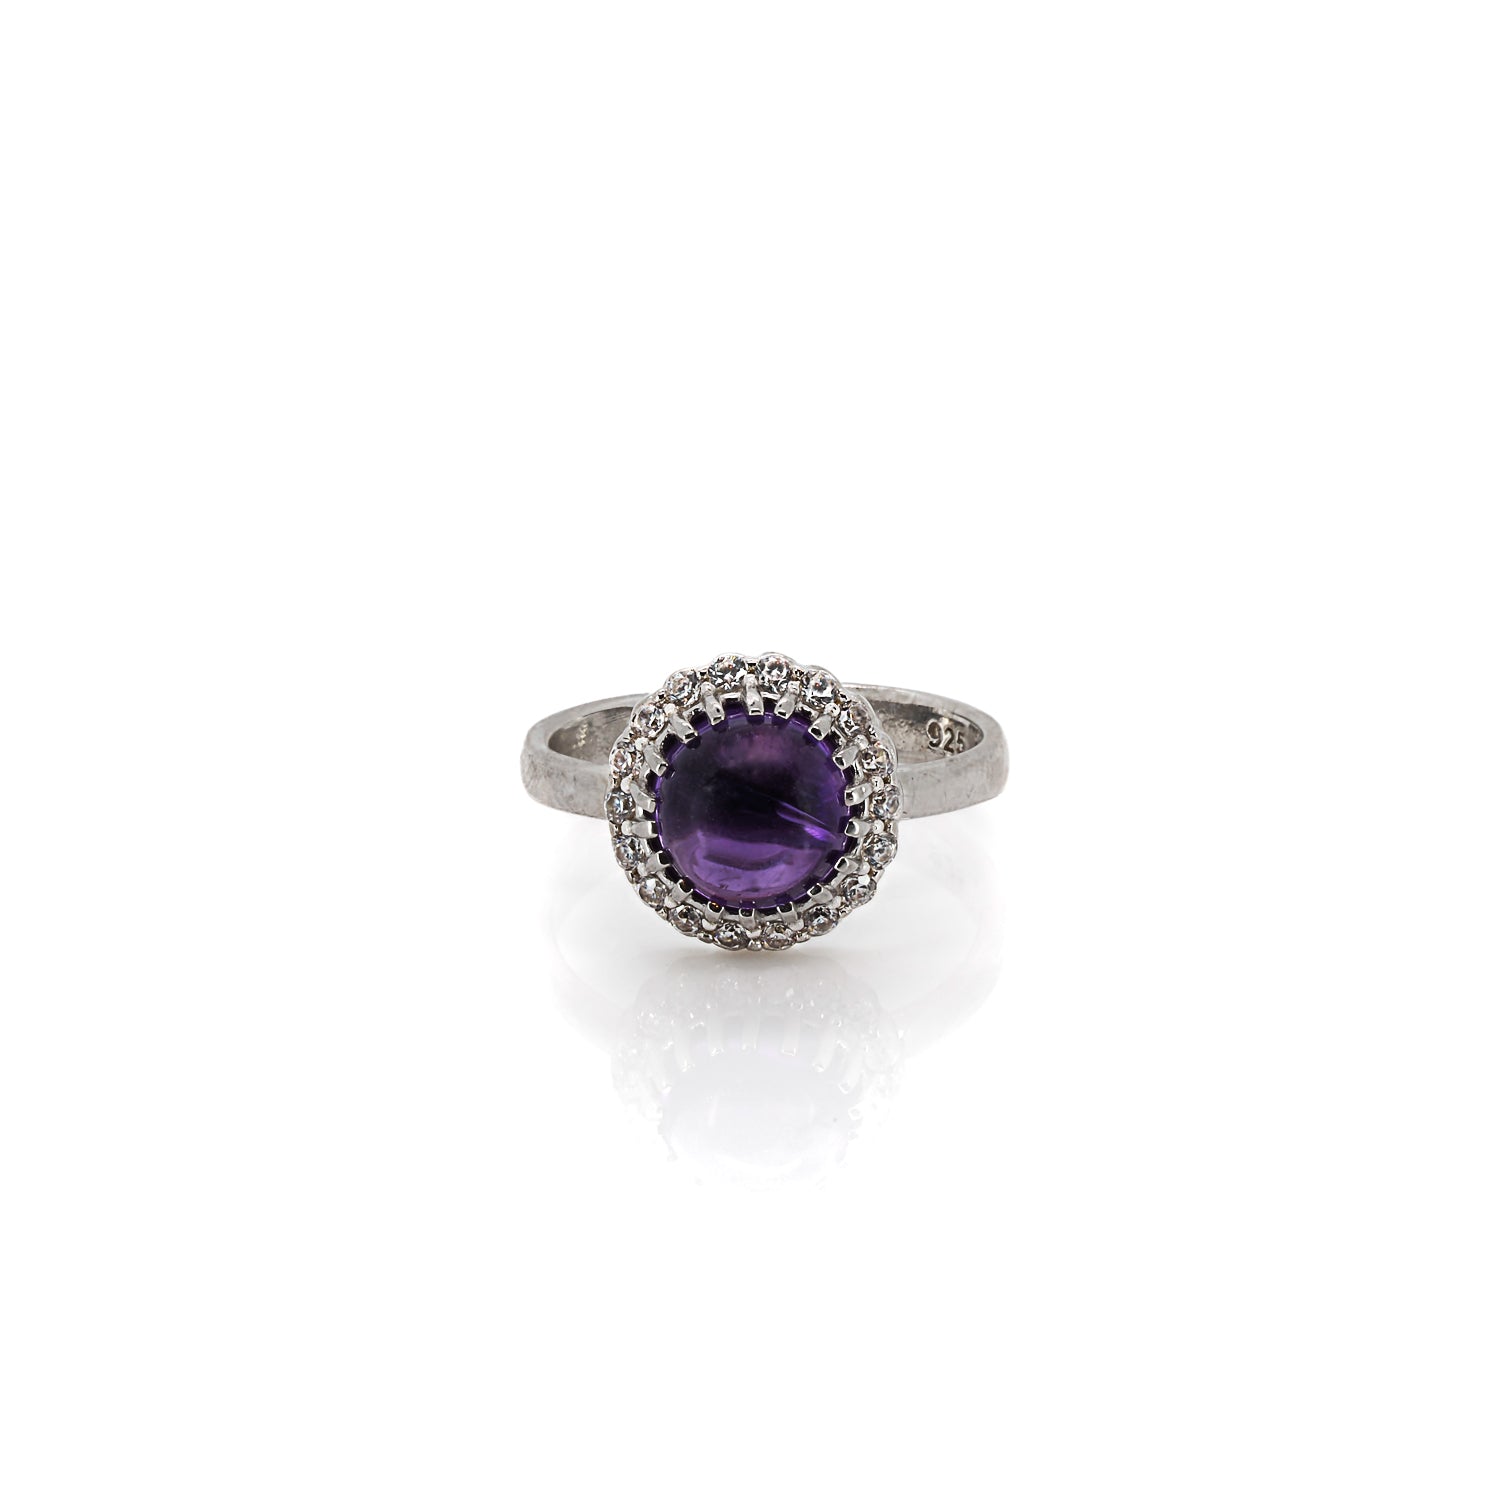 Handcrafted Amethyst Jewelry - Serenity in Every Detail